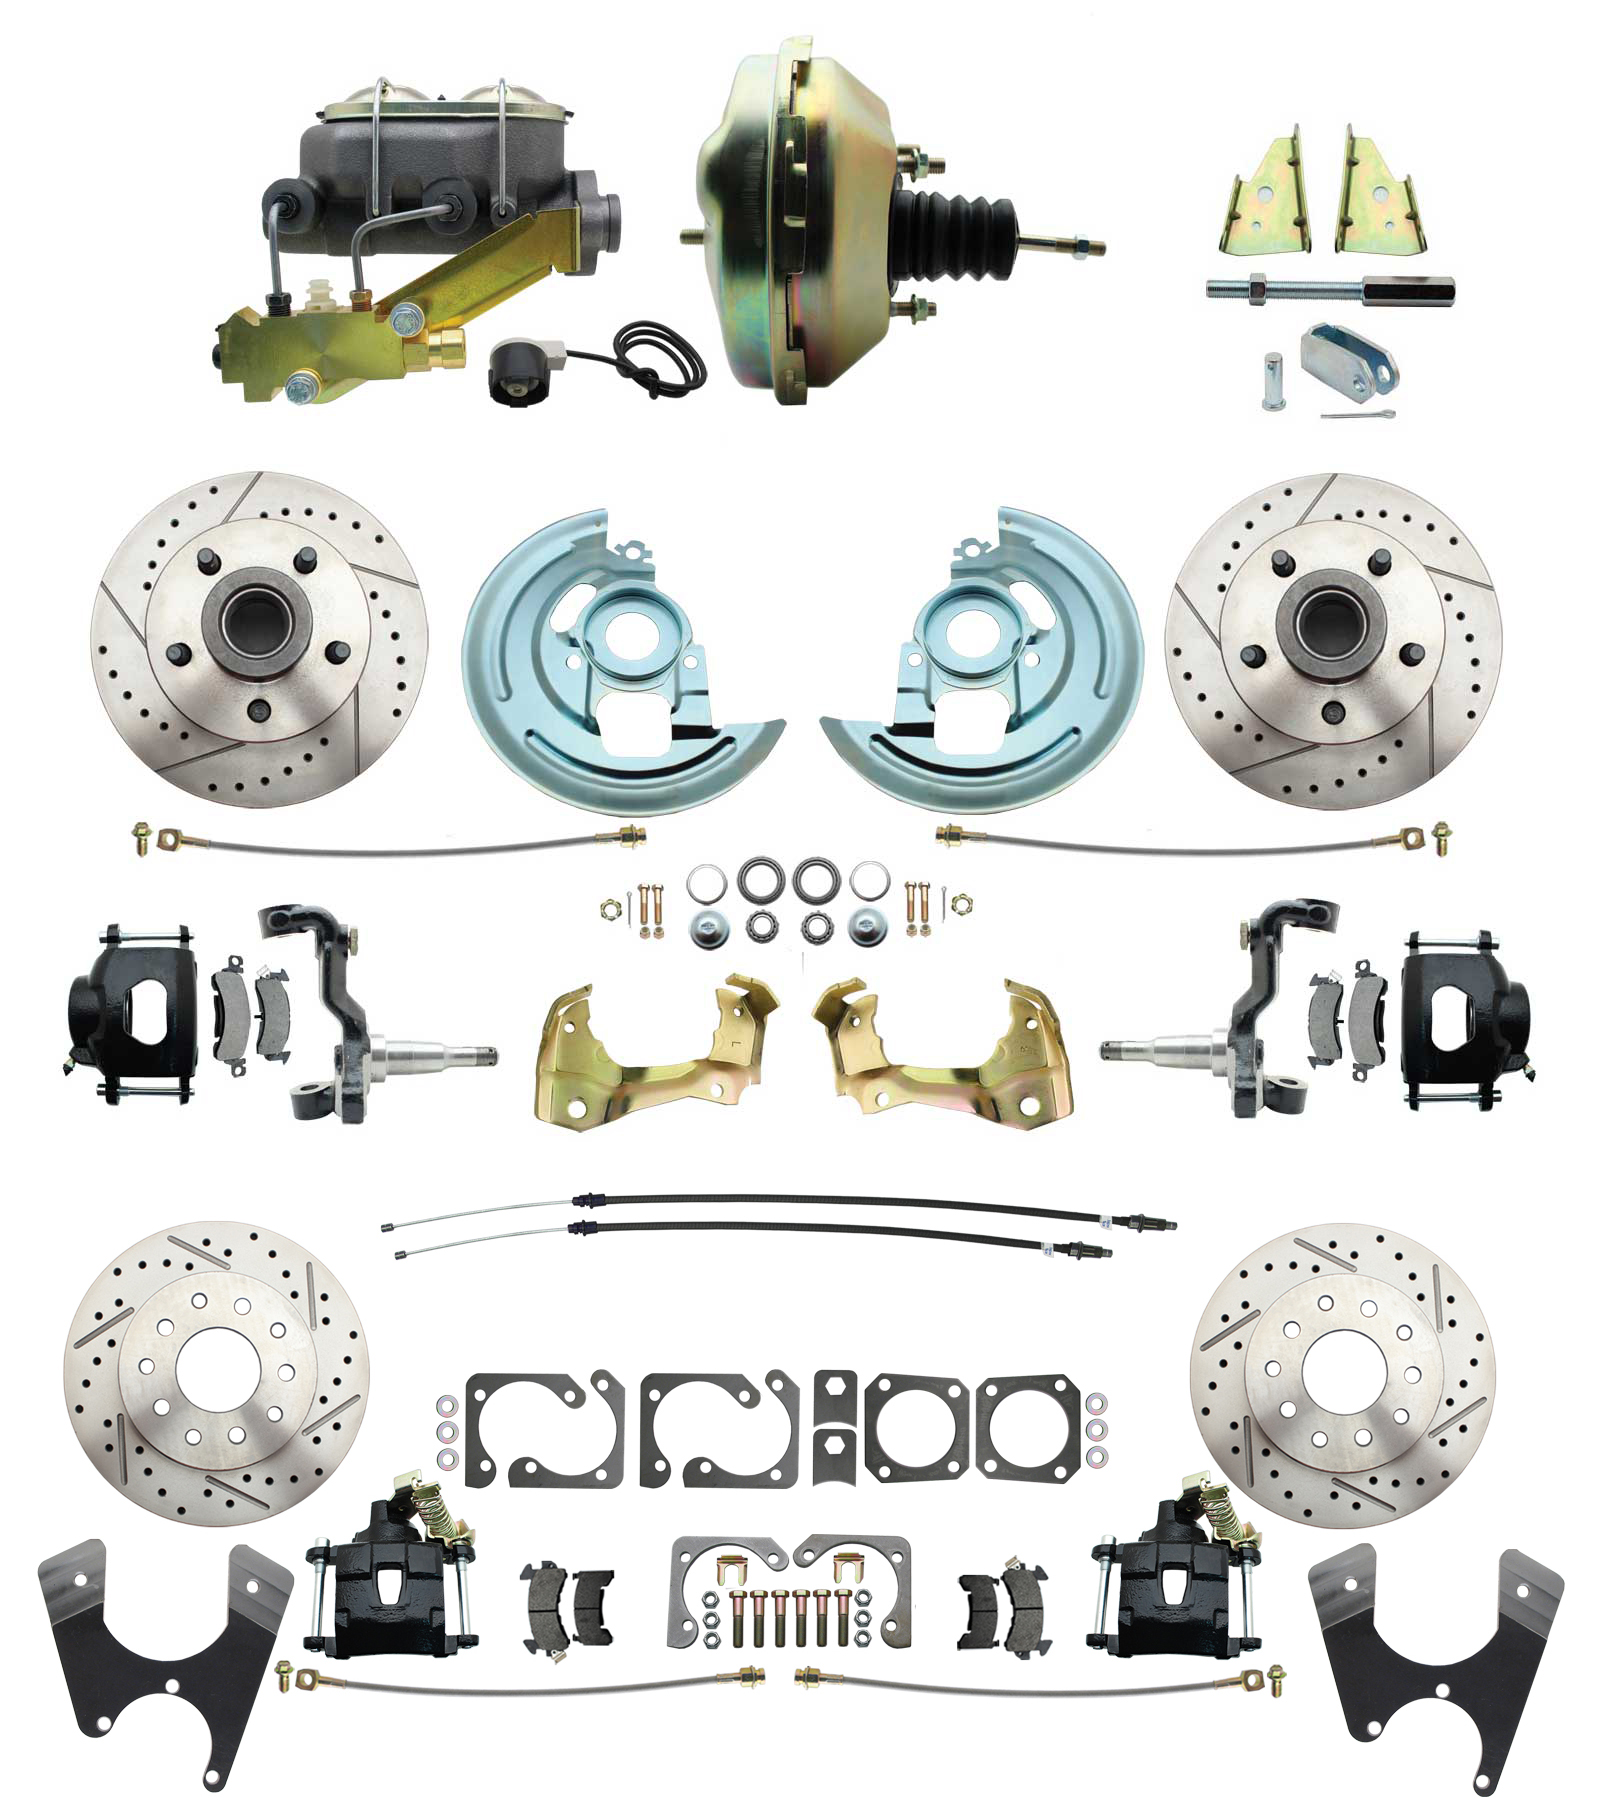 1967-1969 Camaro/ Firebird & 1968-1974 Chevy Nova Front & Rear Power Disc Brake Conversion Kit Drilled & Slotted & Powder Coated Black Calipers Rotors W/9 Dual Zinc Booster Kit